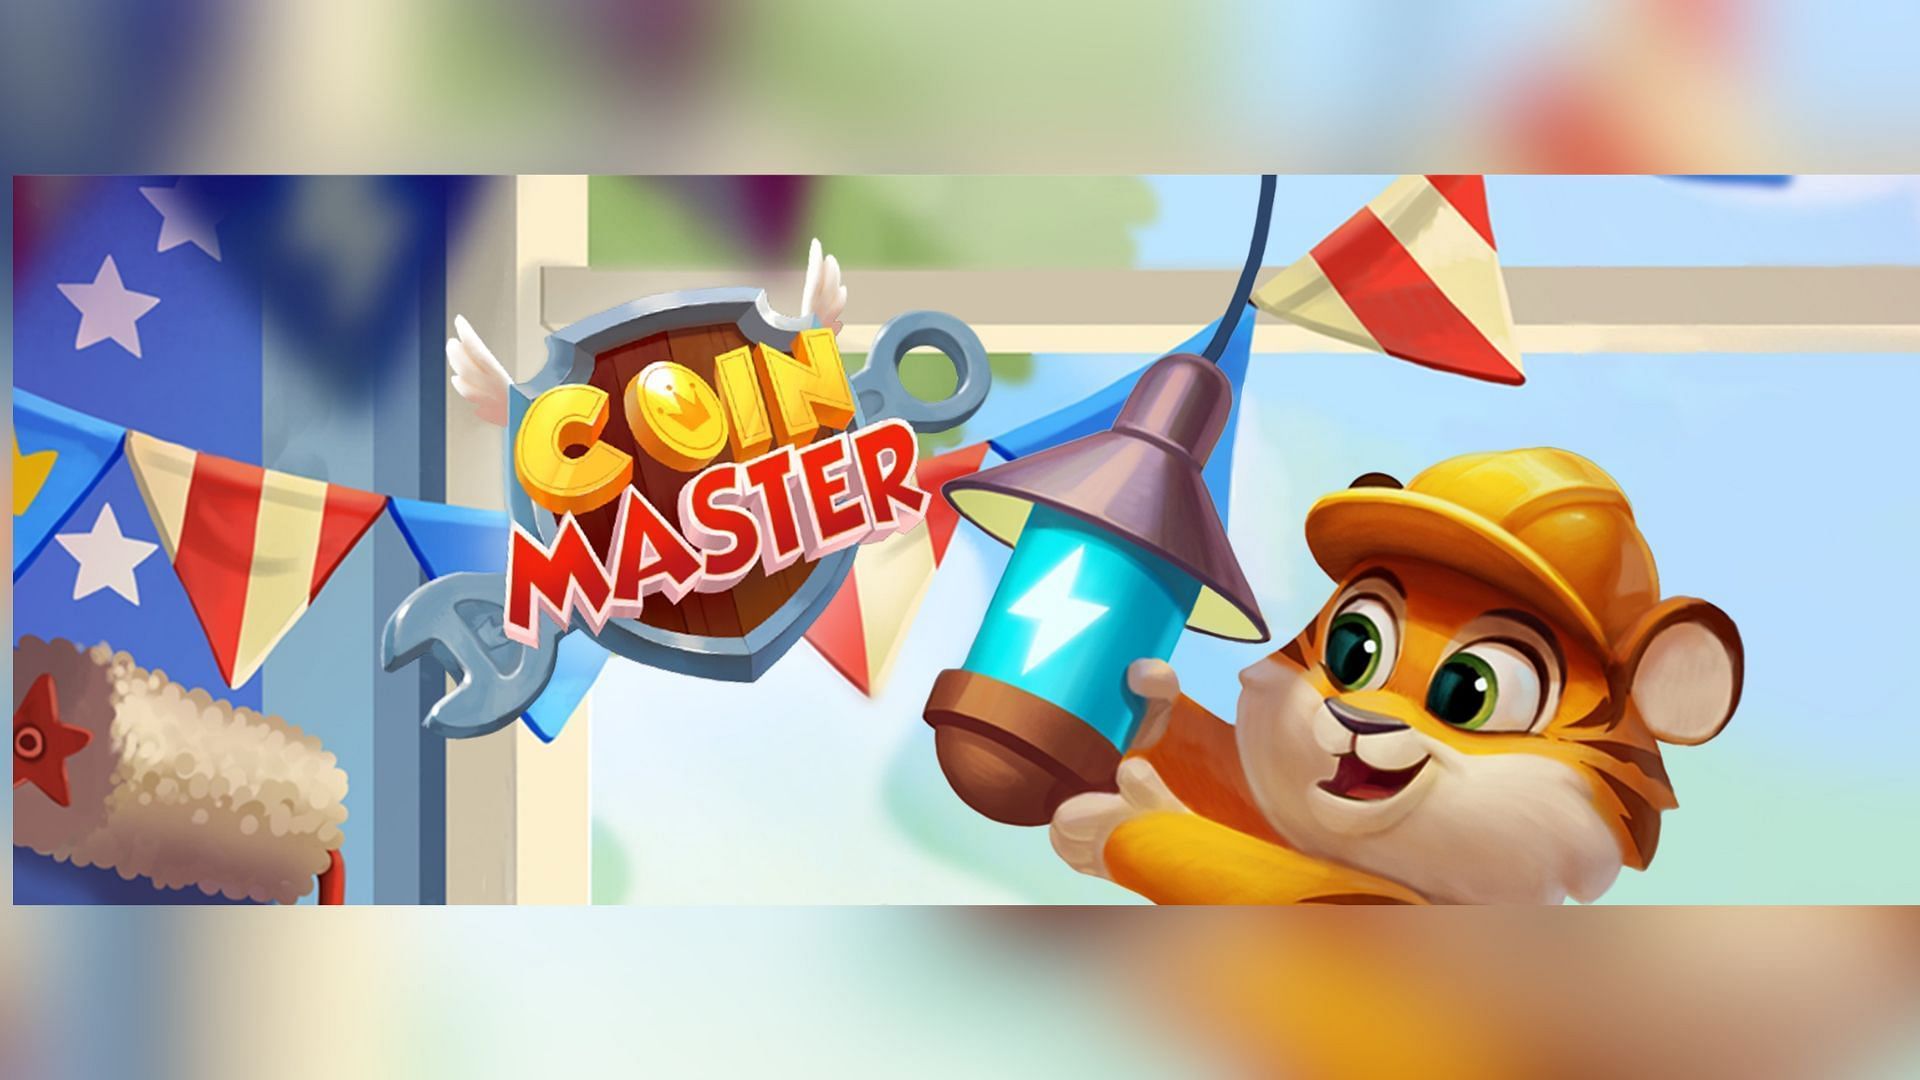 Get Coin Master free spins daily by redeeming links (Image via Moon Active)